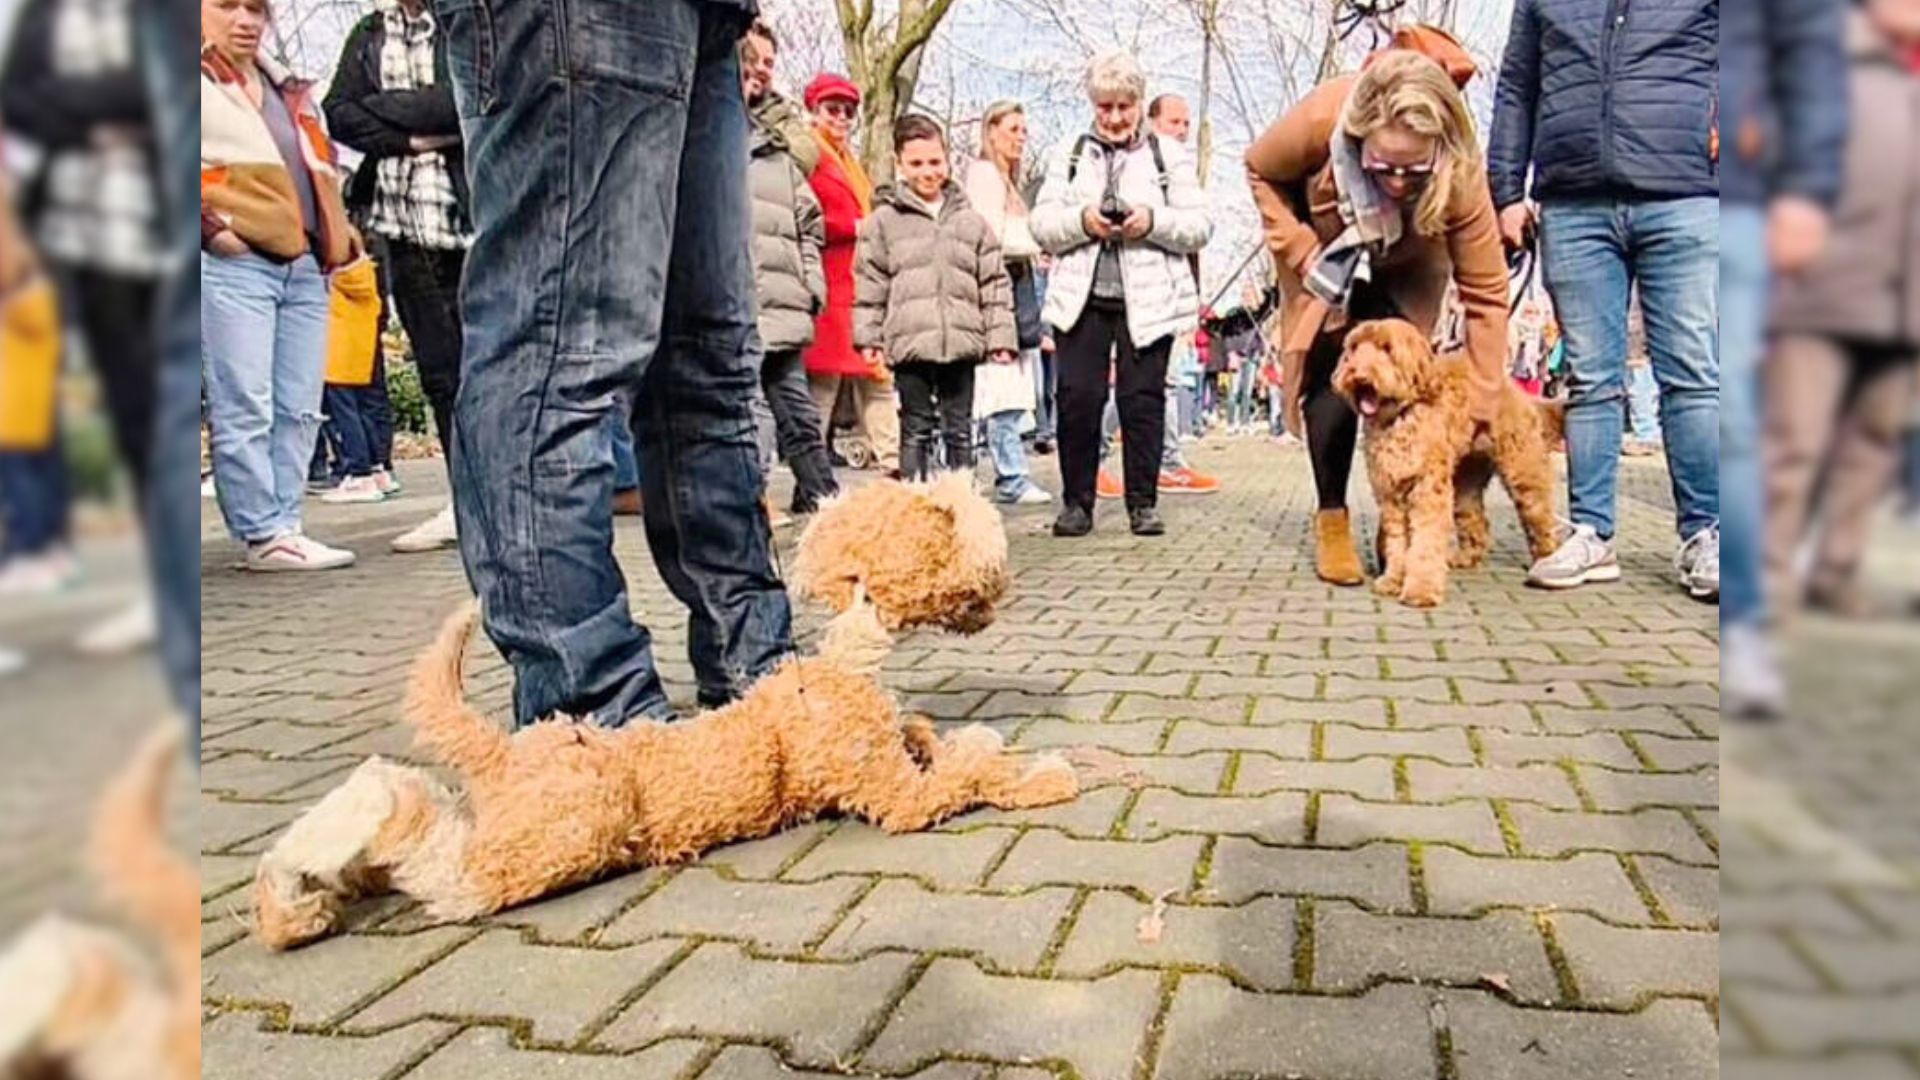 Man Walking His Dog Was Surprised When He Came Across A Very Unusual ‘Pet’